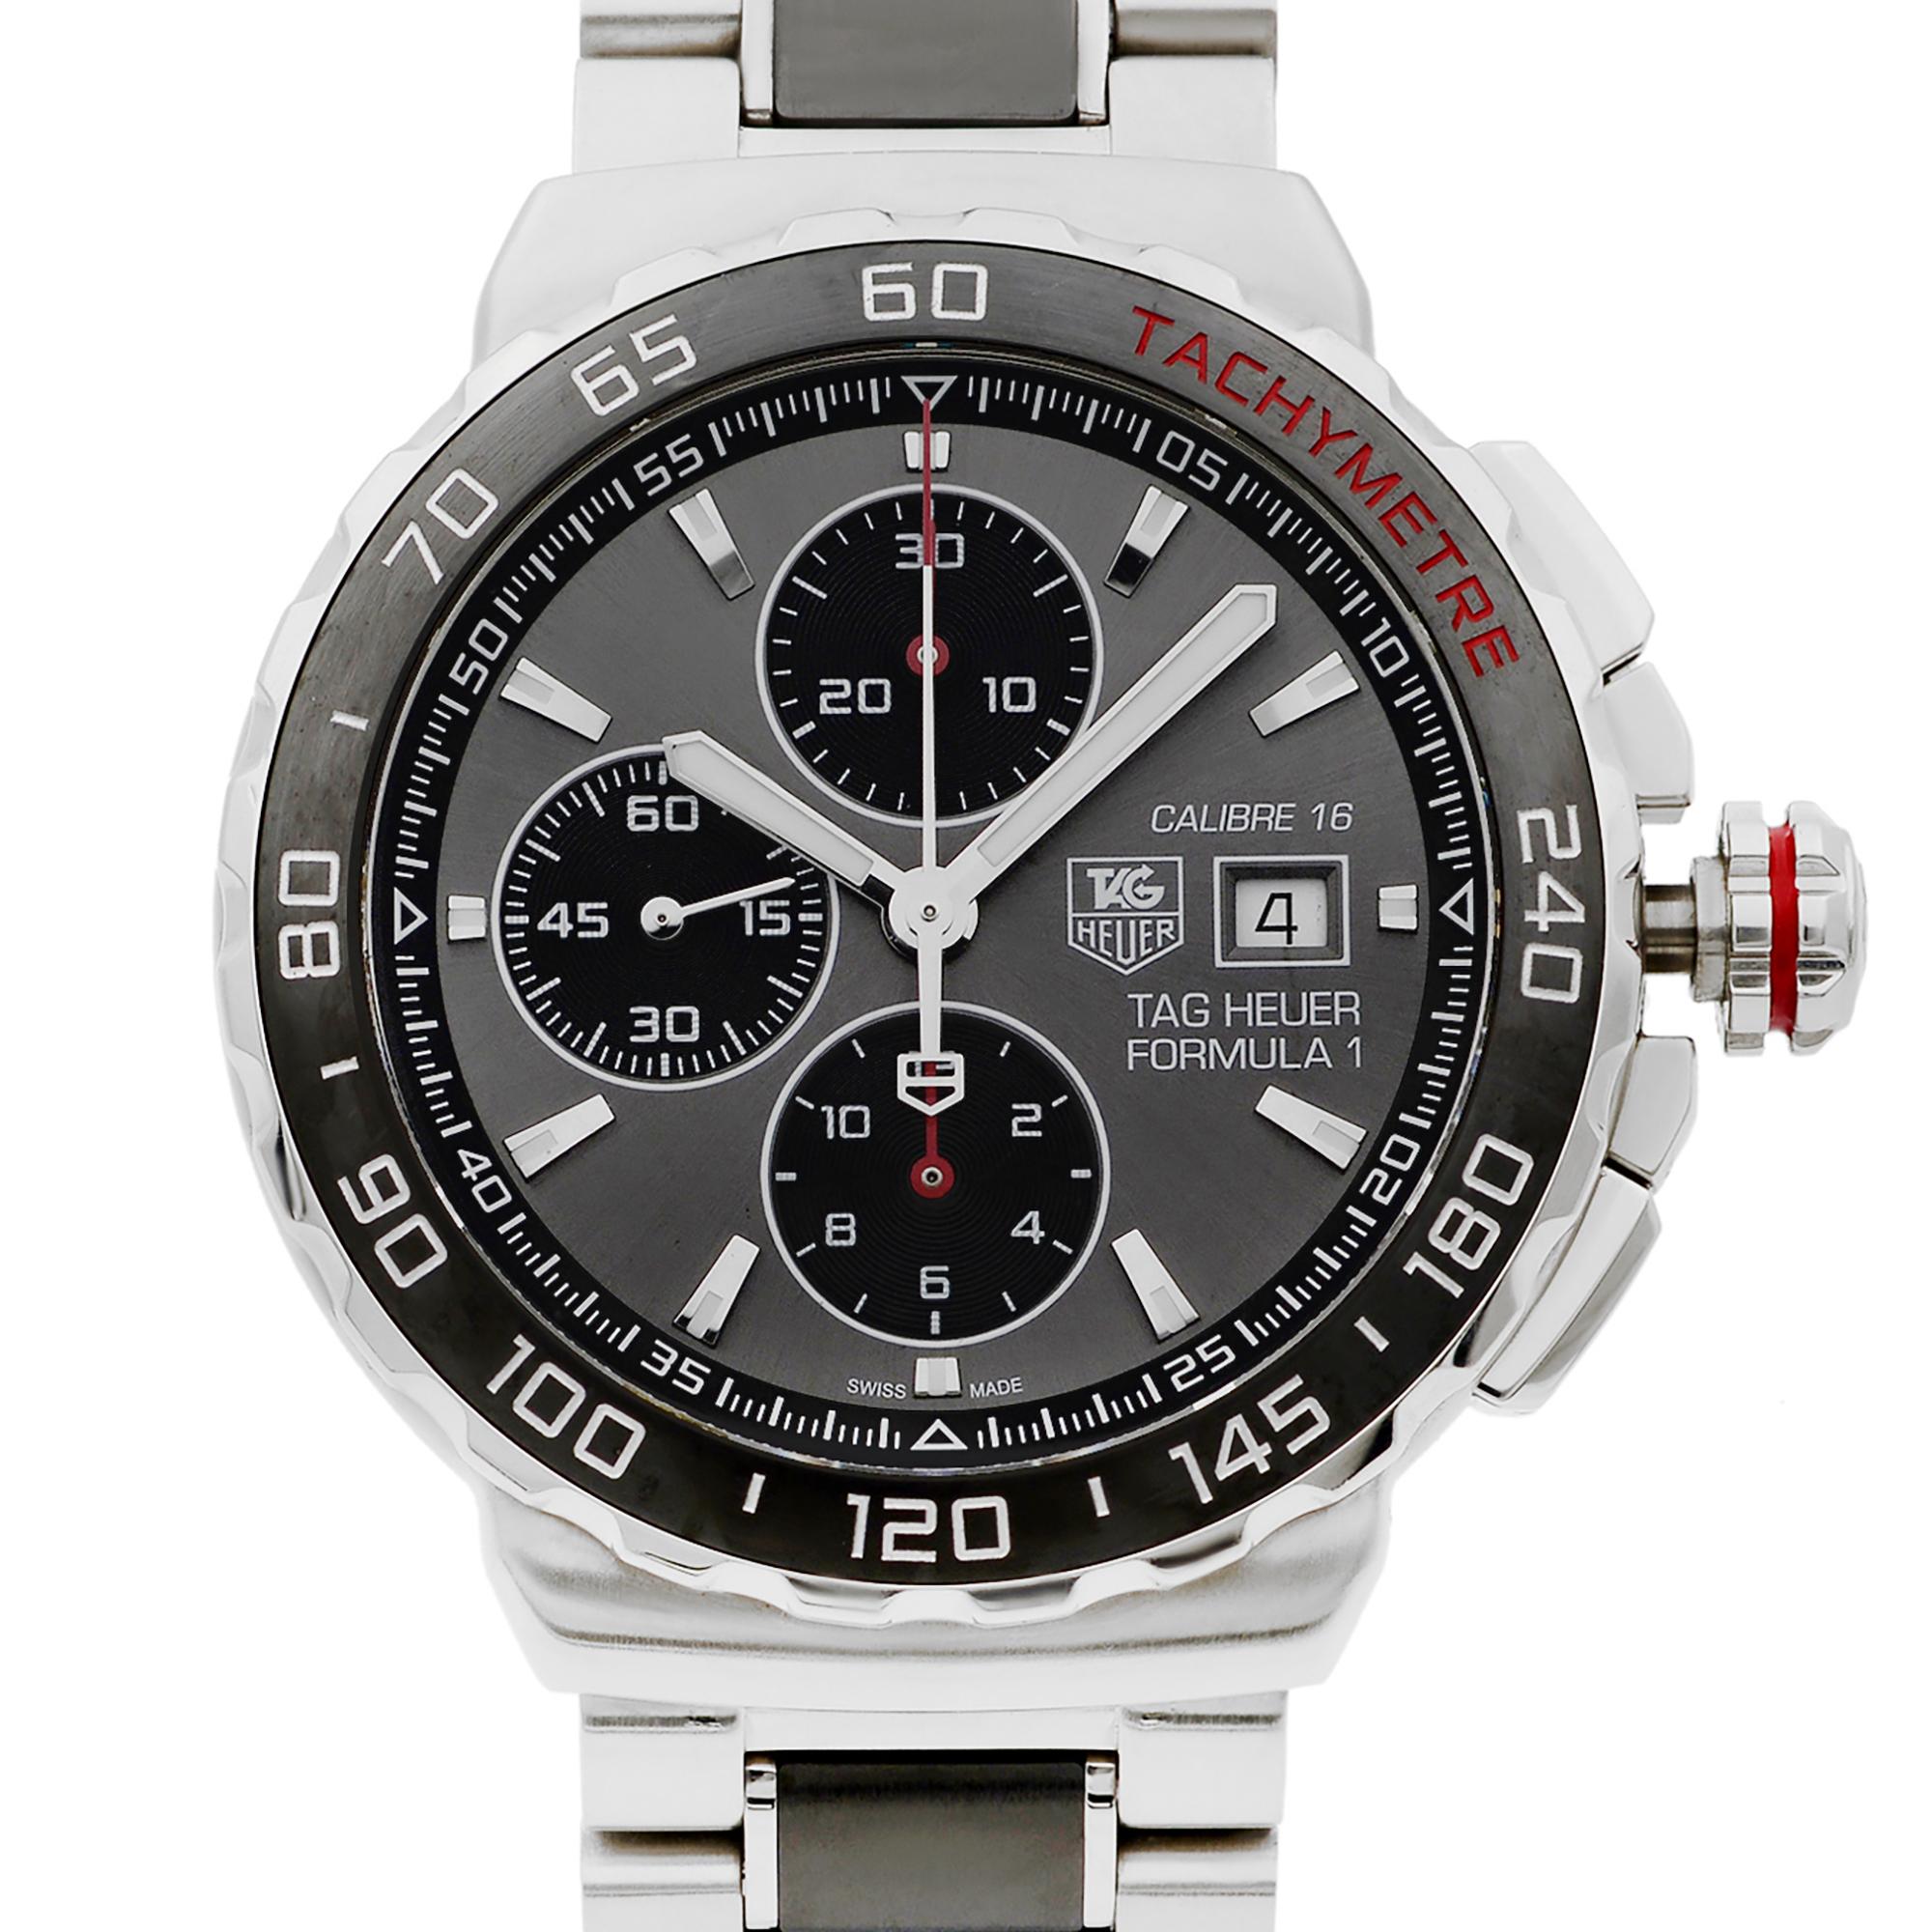 Pre-owned Mint Condition TAG Heuer Formula 1 Men's Watch CAU2011.BA0873.This beautiful timepiece that is powered by mechanical (automatic) movement which is cased in a stainless steel case. It has a round shape face, chronograph, date indicator,